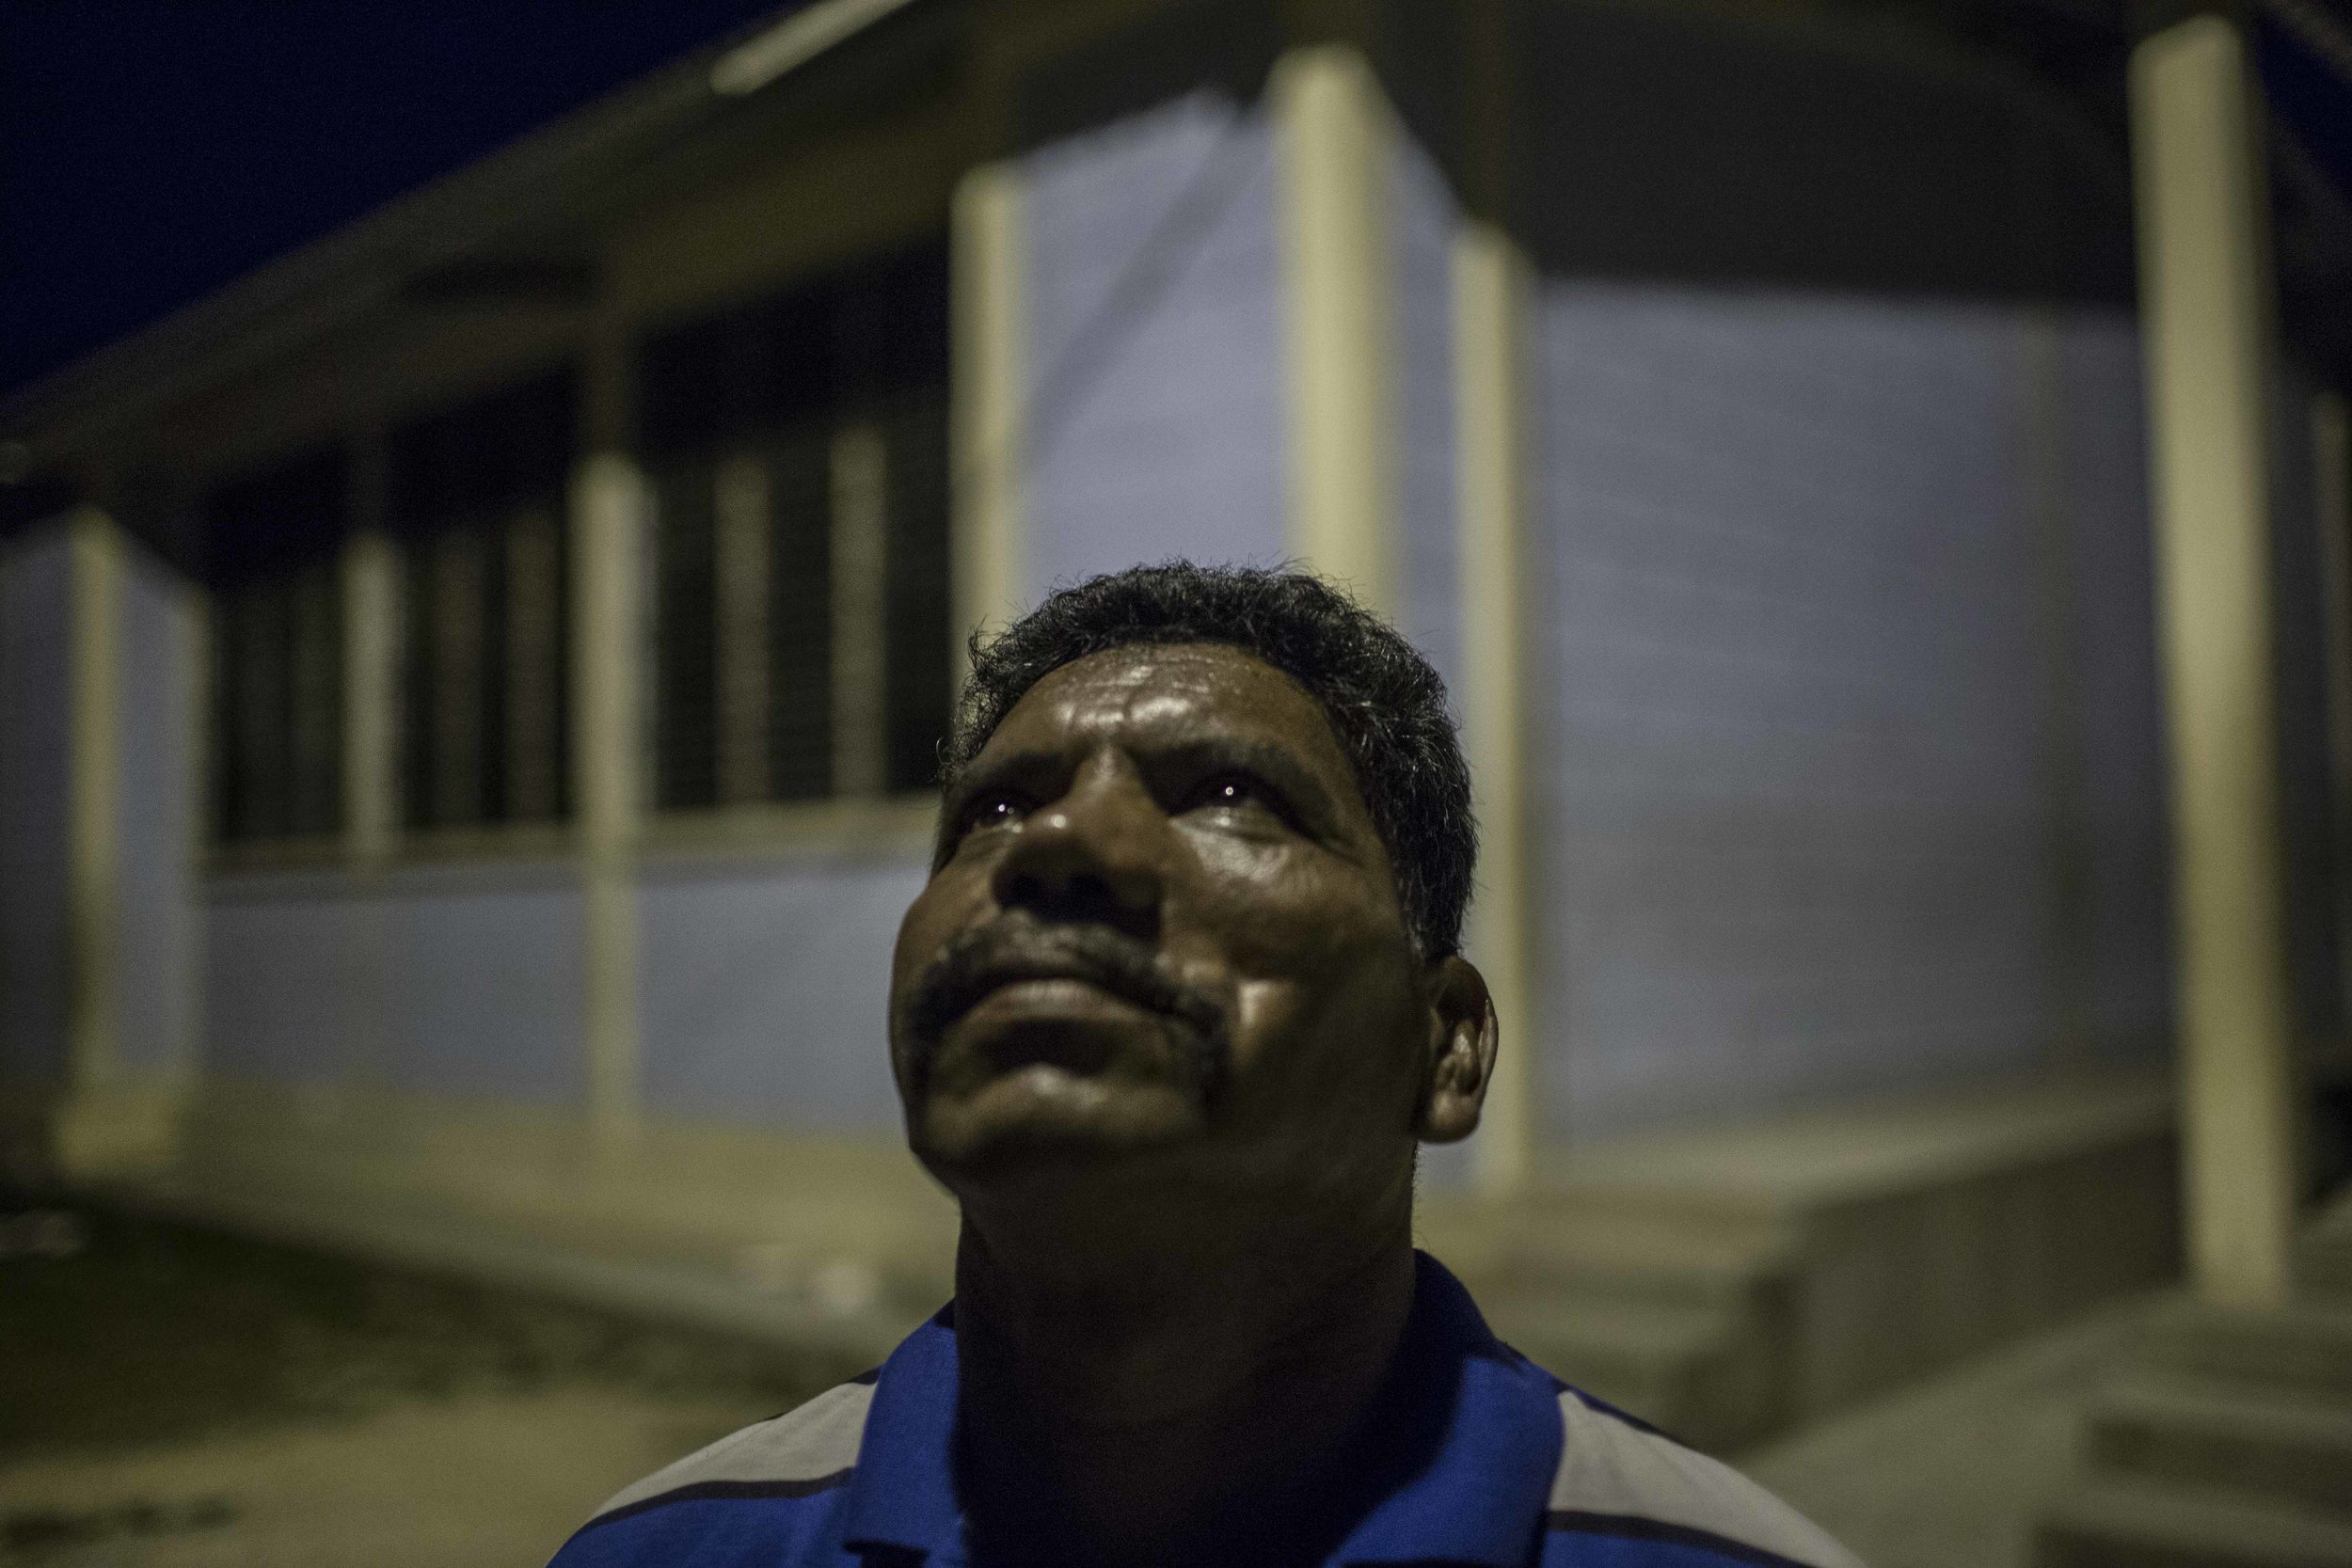  Francisco Ramirez, &nbsp;in the Guadalupe Carney community, belongs to the Aguán peasant organization. Francisco works in oil palm plantations. He and other farmers families have occupied a land that had been granted to them through the governmental